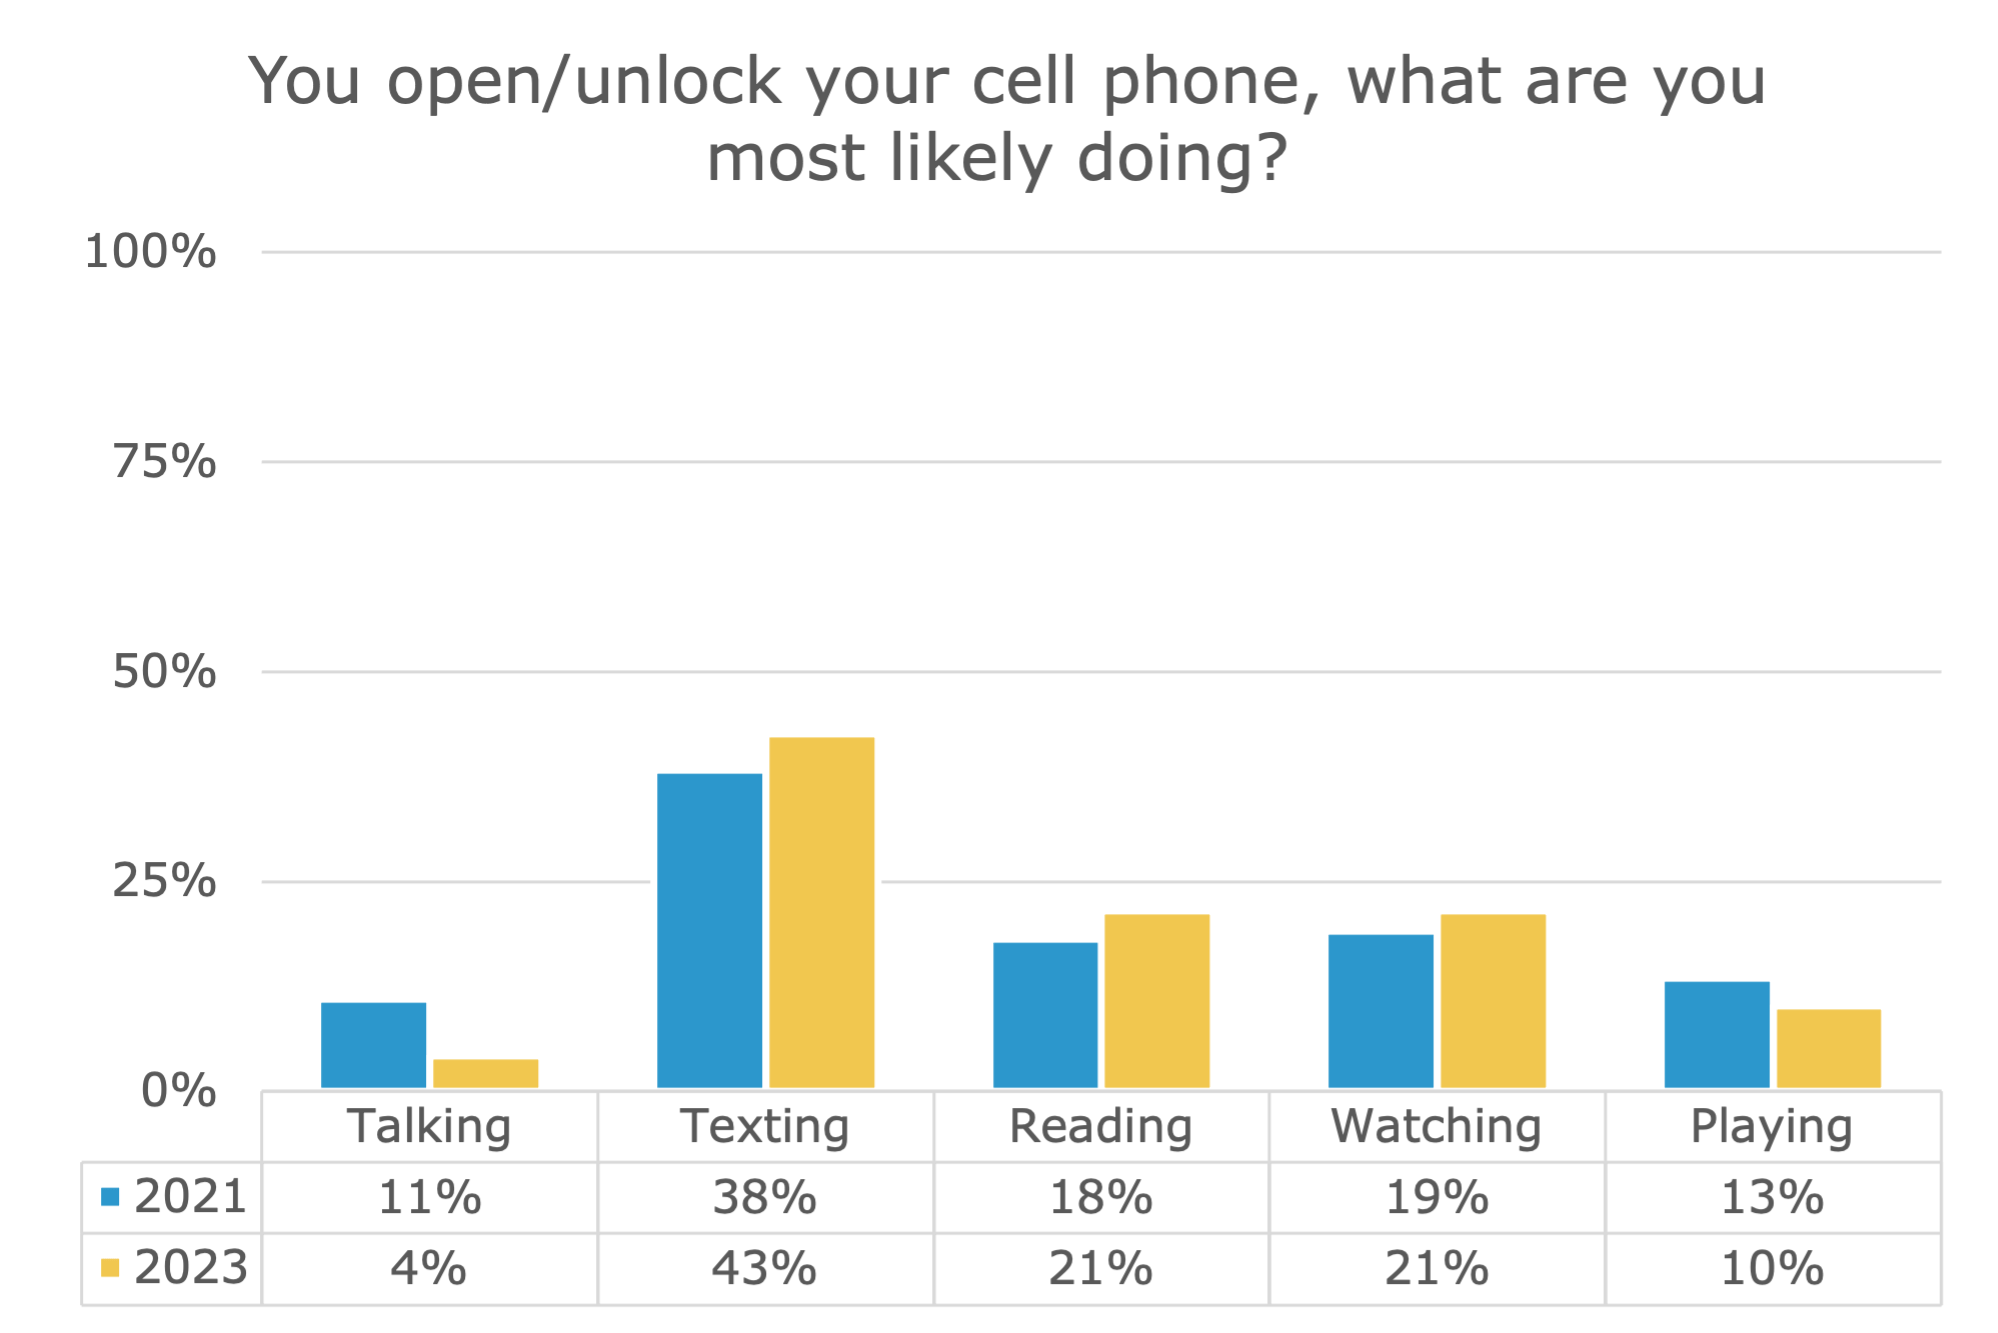 What are you most likely doing on your cellphone.